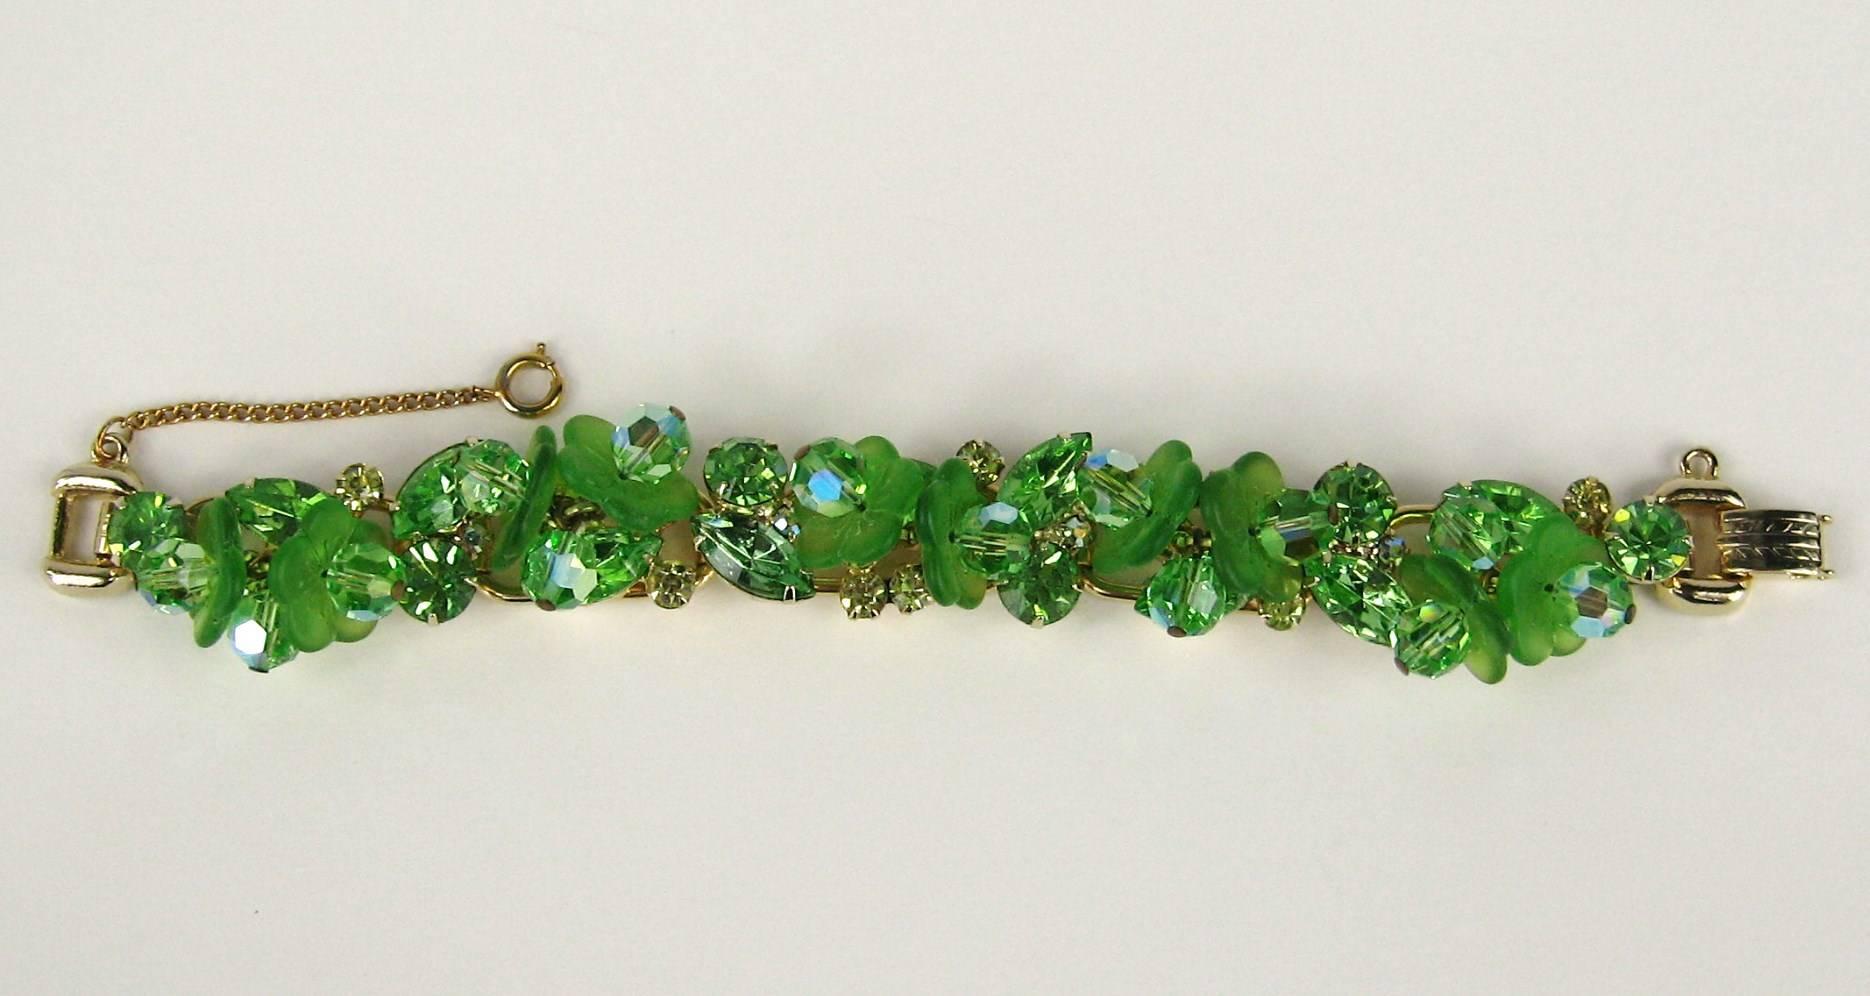 Stunning Juliana Bracelet. This is on the cover of the book Juliana Jewelry Reference Book. The color on this bracelet is amazing. Green Matte and Faceted Beading. Safety chain. Gold-tone hardware. Measuring 7 inches end to end. Fold over clasp.